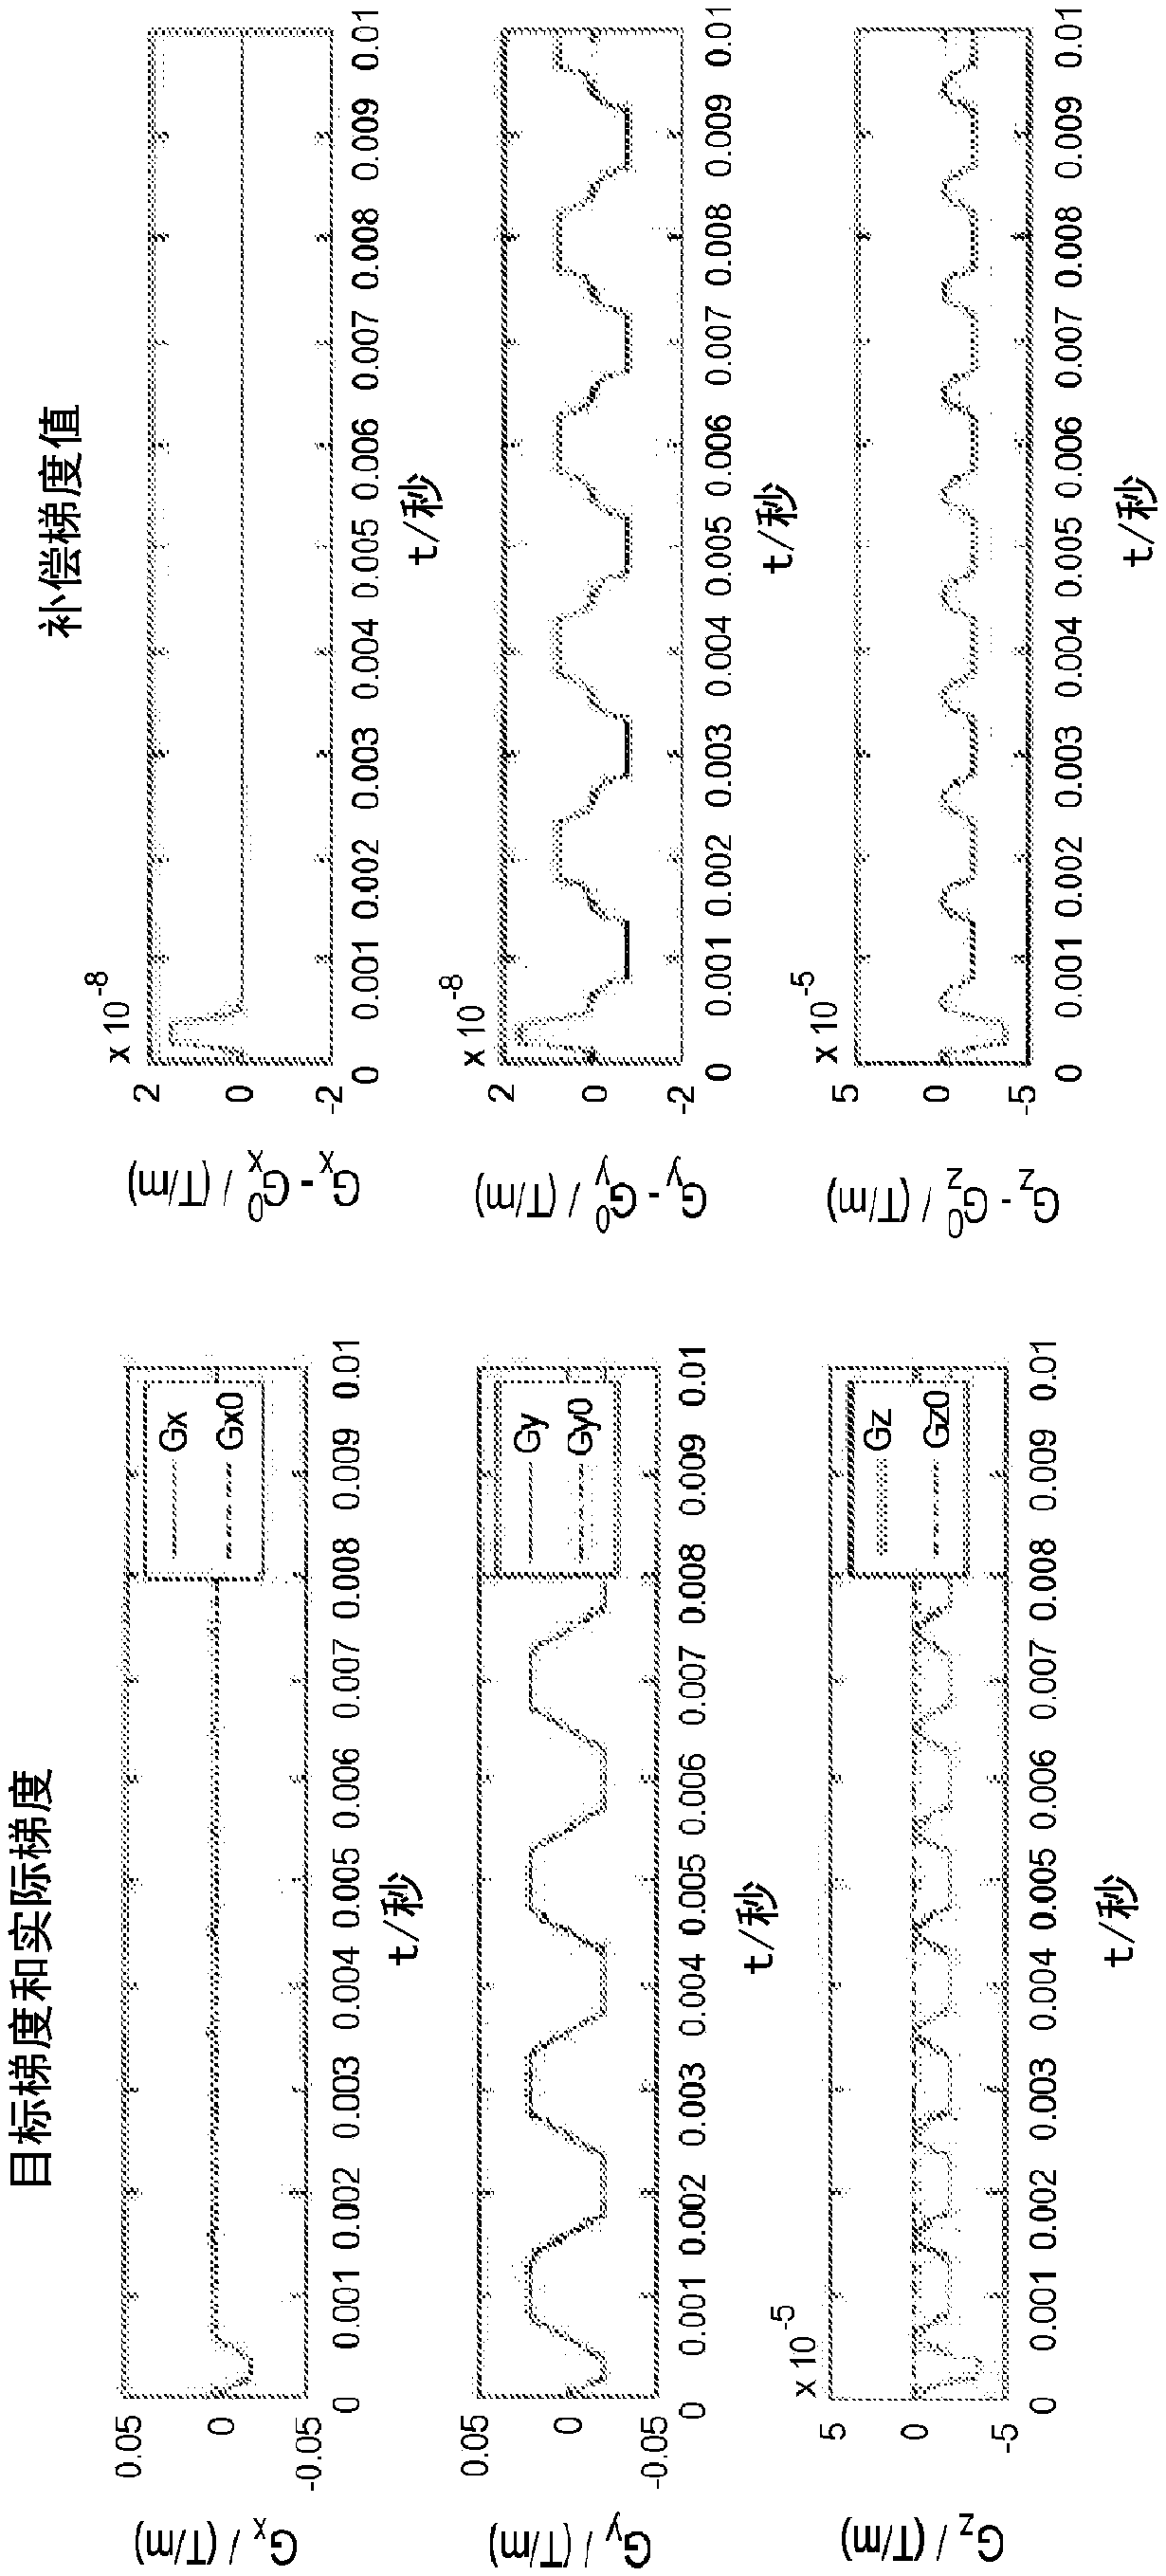 Systems and methods for concomitant field correction in magnetic resonance imaging with asymmetric gradients